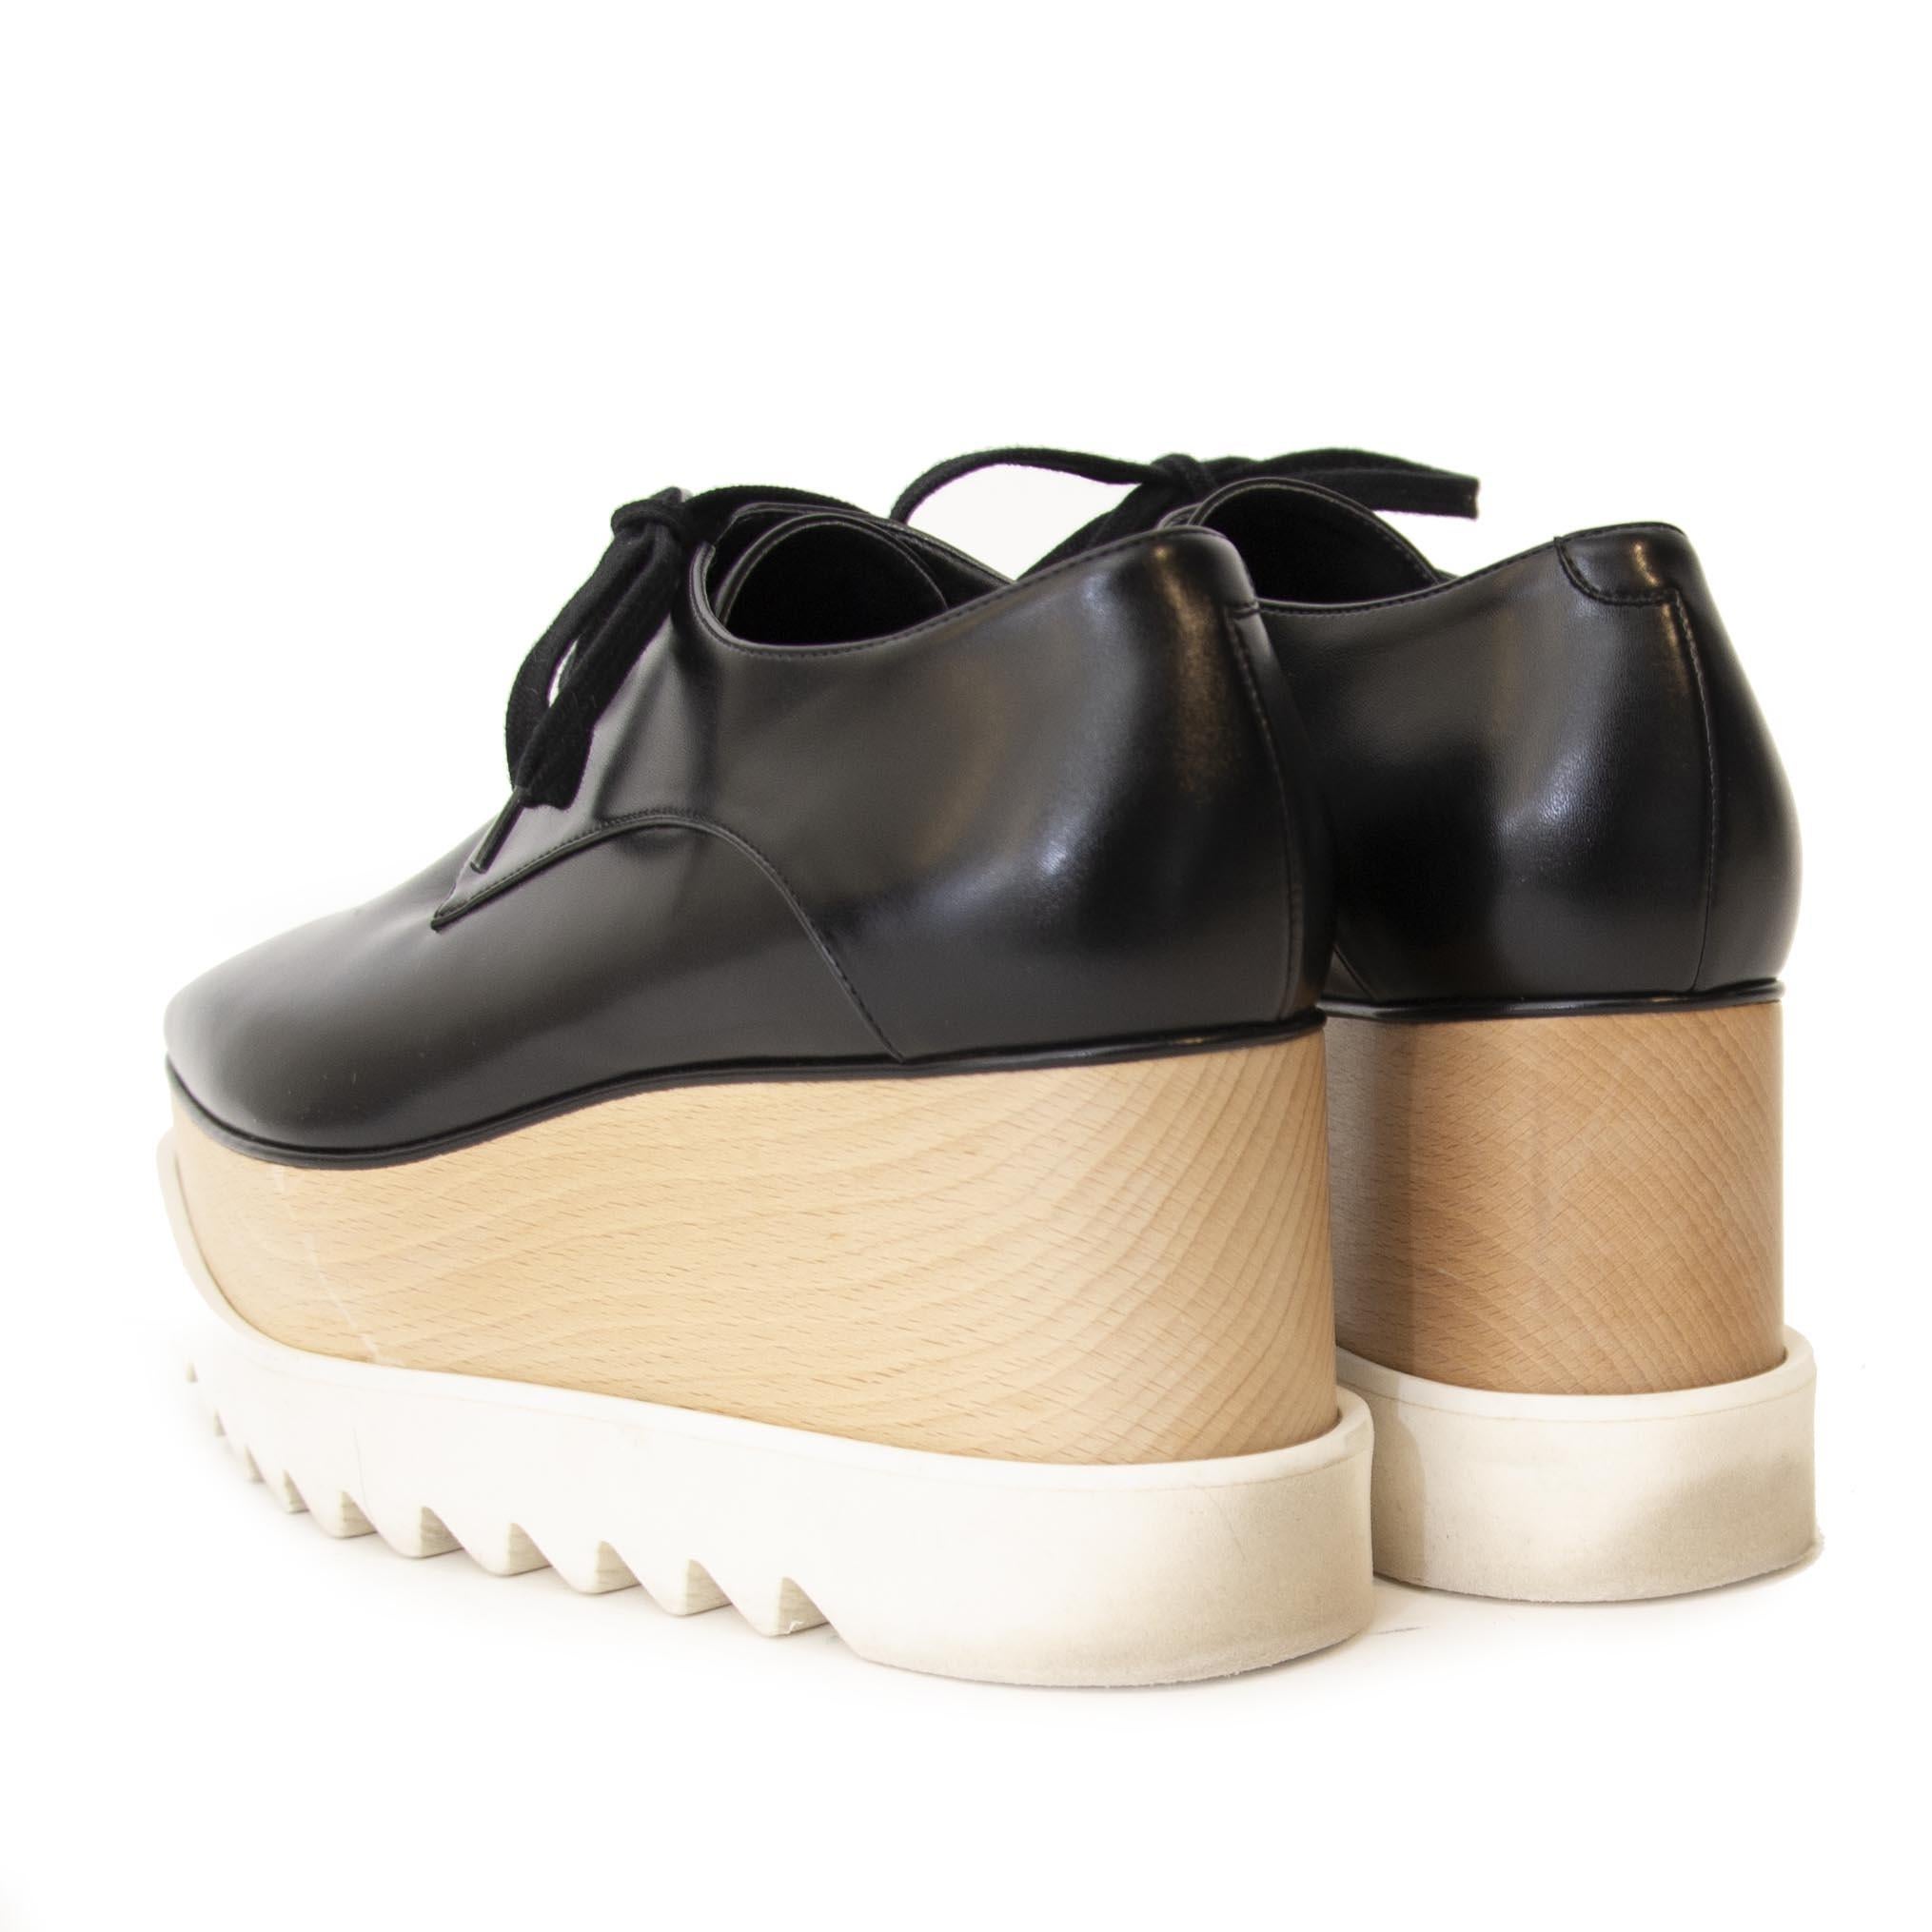 Very good preloved condition

Stella McCartney Black Elyse Shoes - Size 39

Stella McCartney is known for its edgy designs, so are these trending Black Elyse shoes. 
These icons are made out of vegan black leather, sustainable wood platform wedges